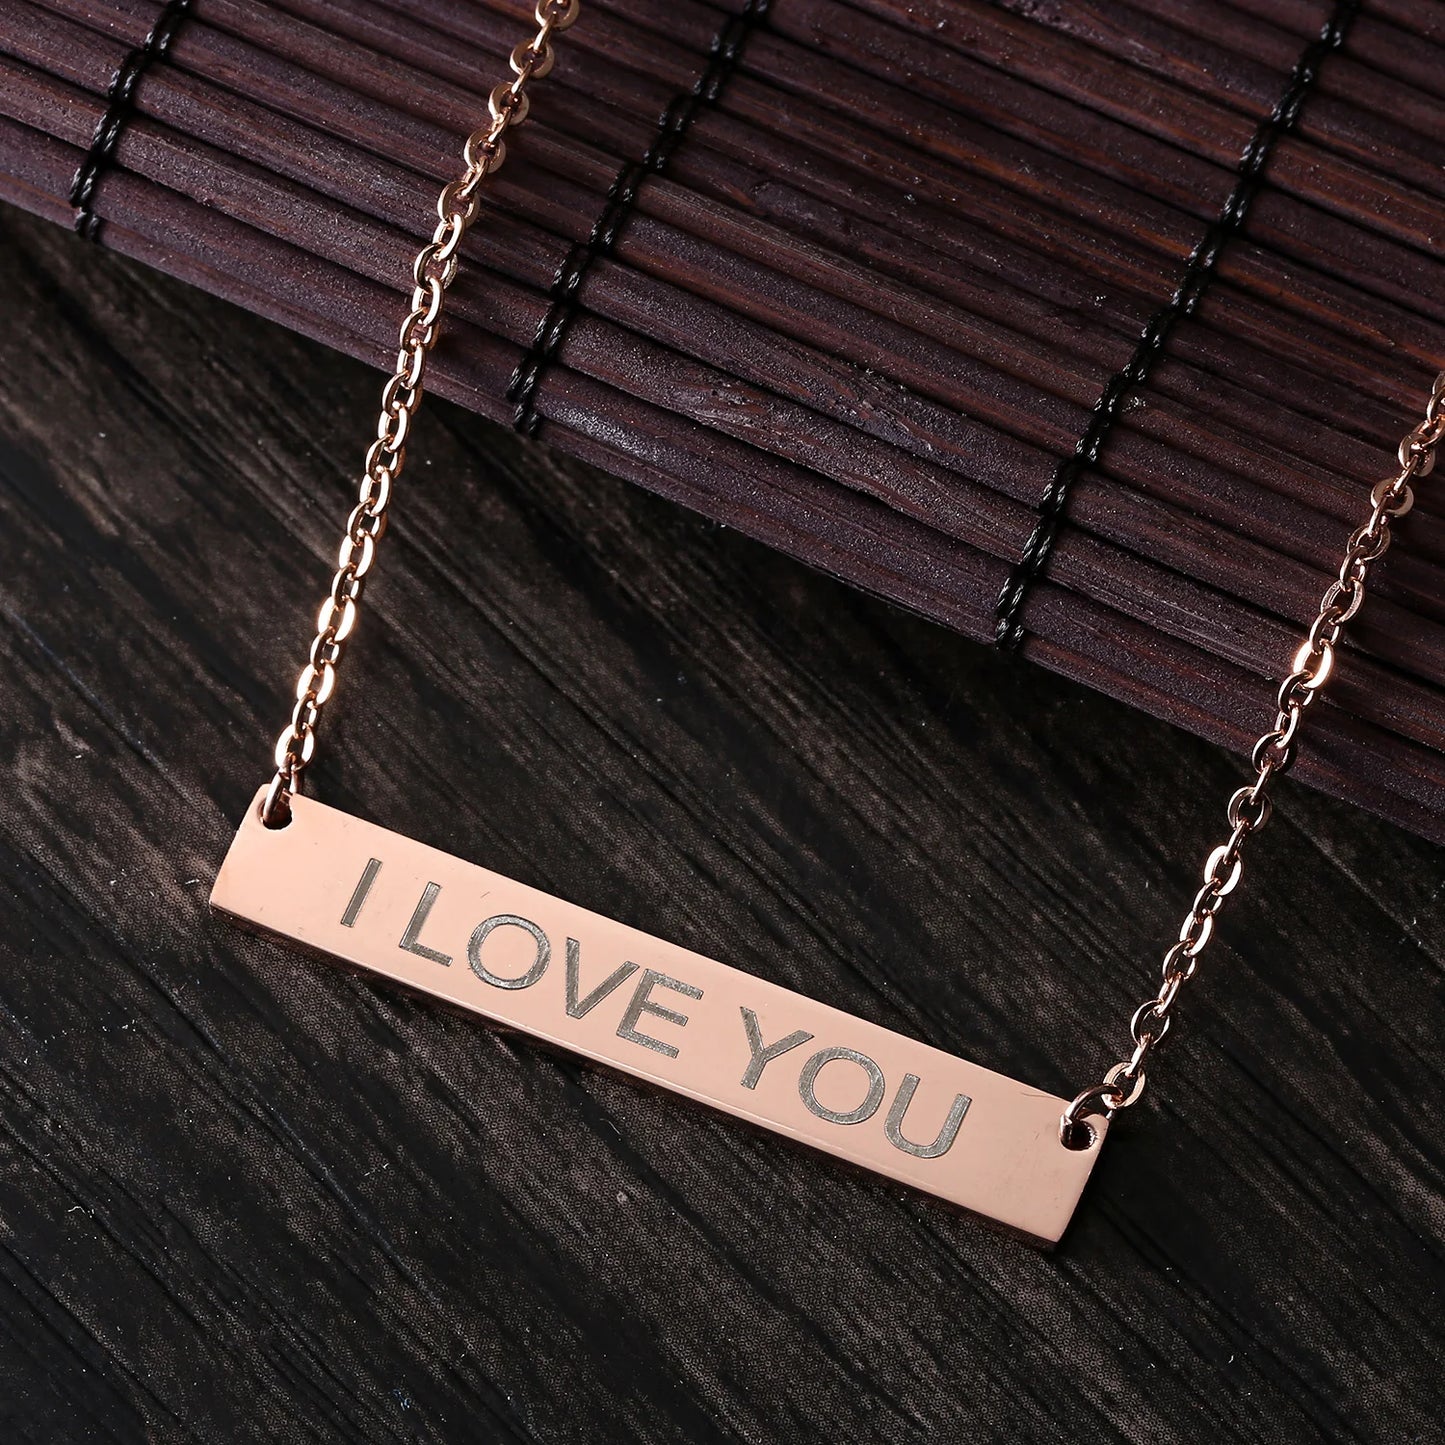 Engraved Bar Necklace Custom Coordinate Name Date Square Pendant Necklace Women Men Personalized Stainless Steel Jewelry Gifts